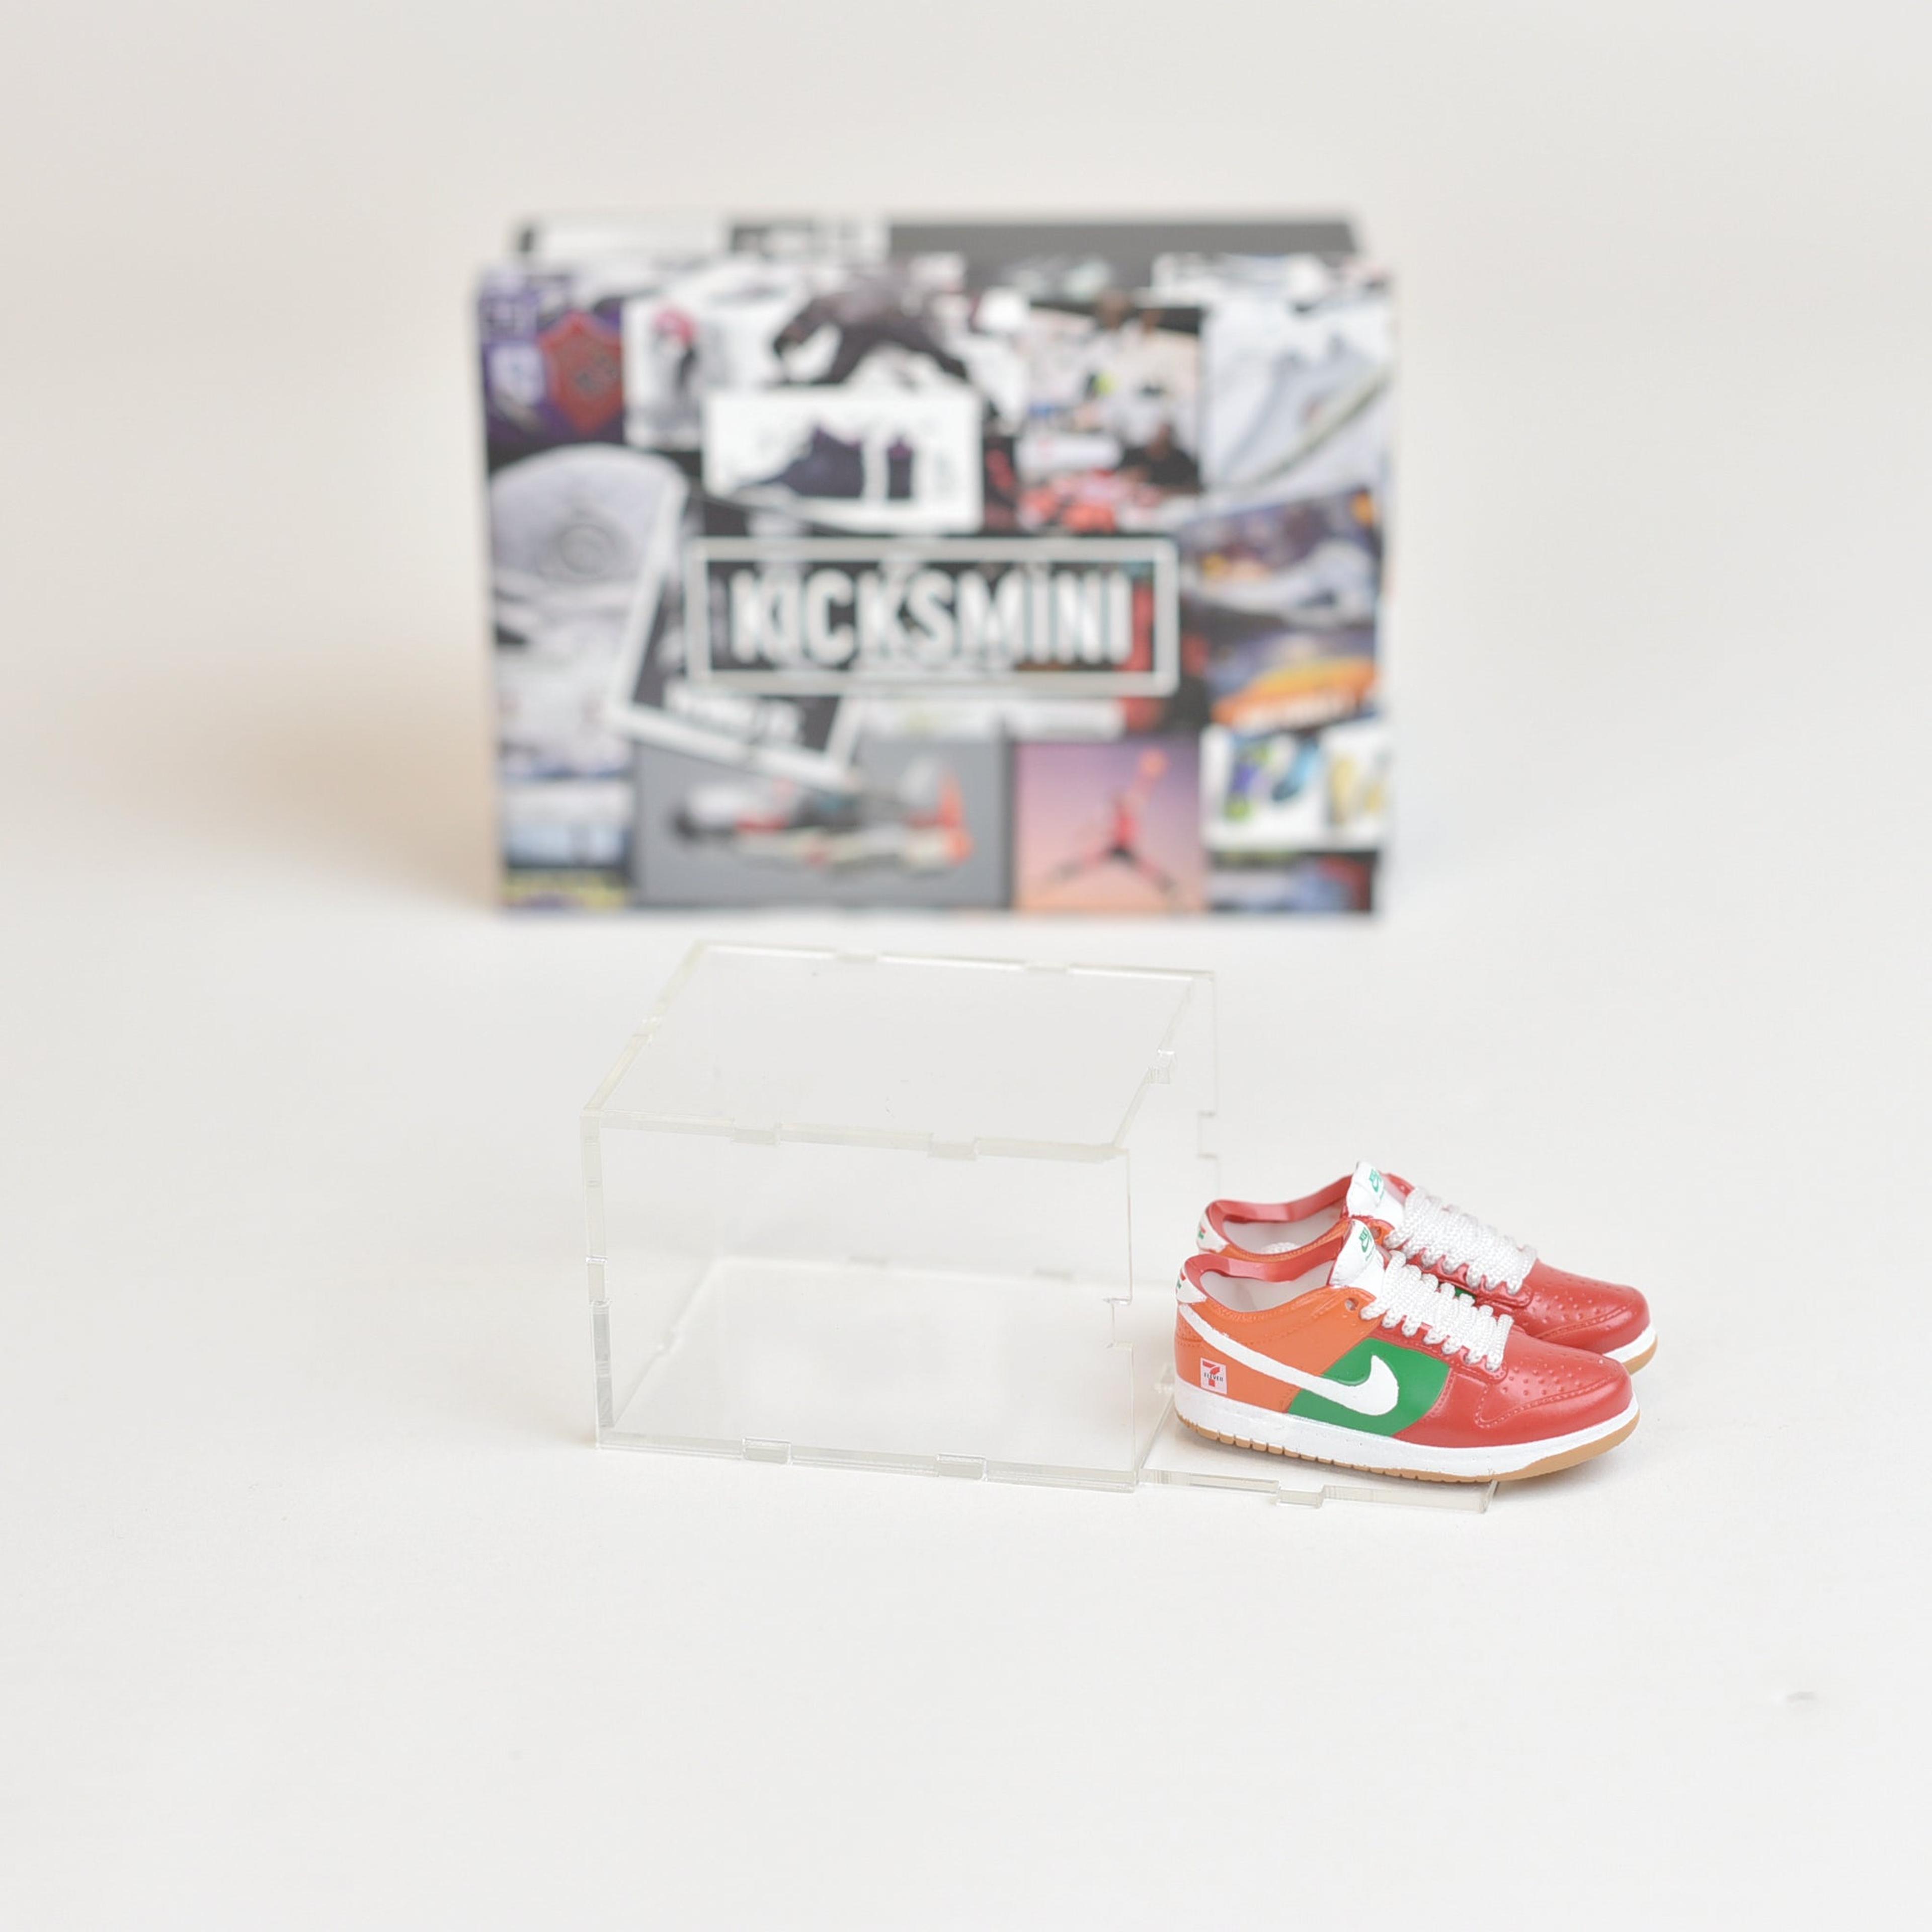 Alternate View 25 of SB Dunk Low Collaboration Mini Sneakers with Display Case